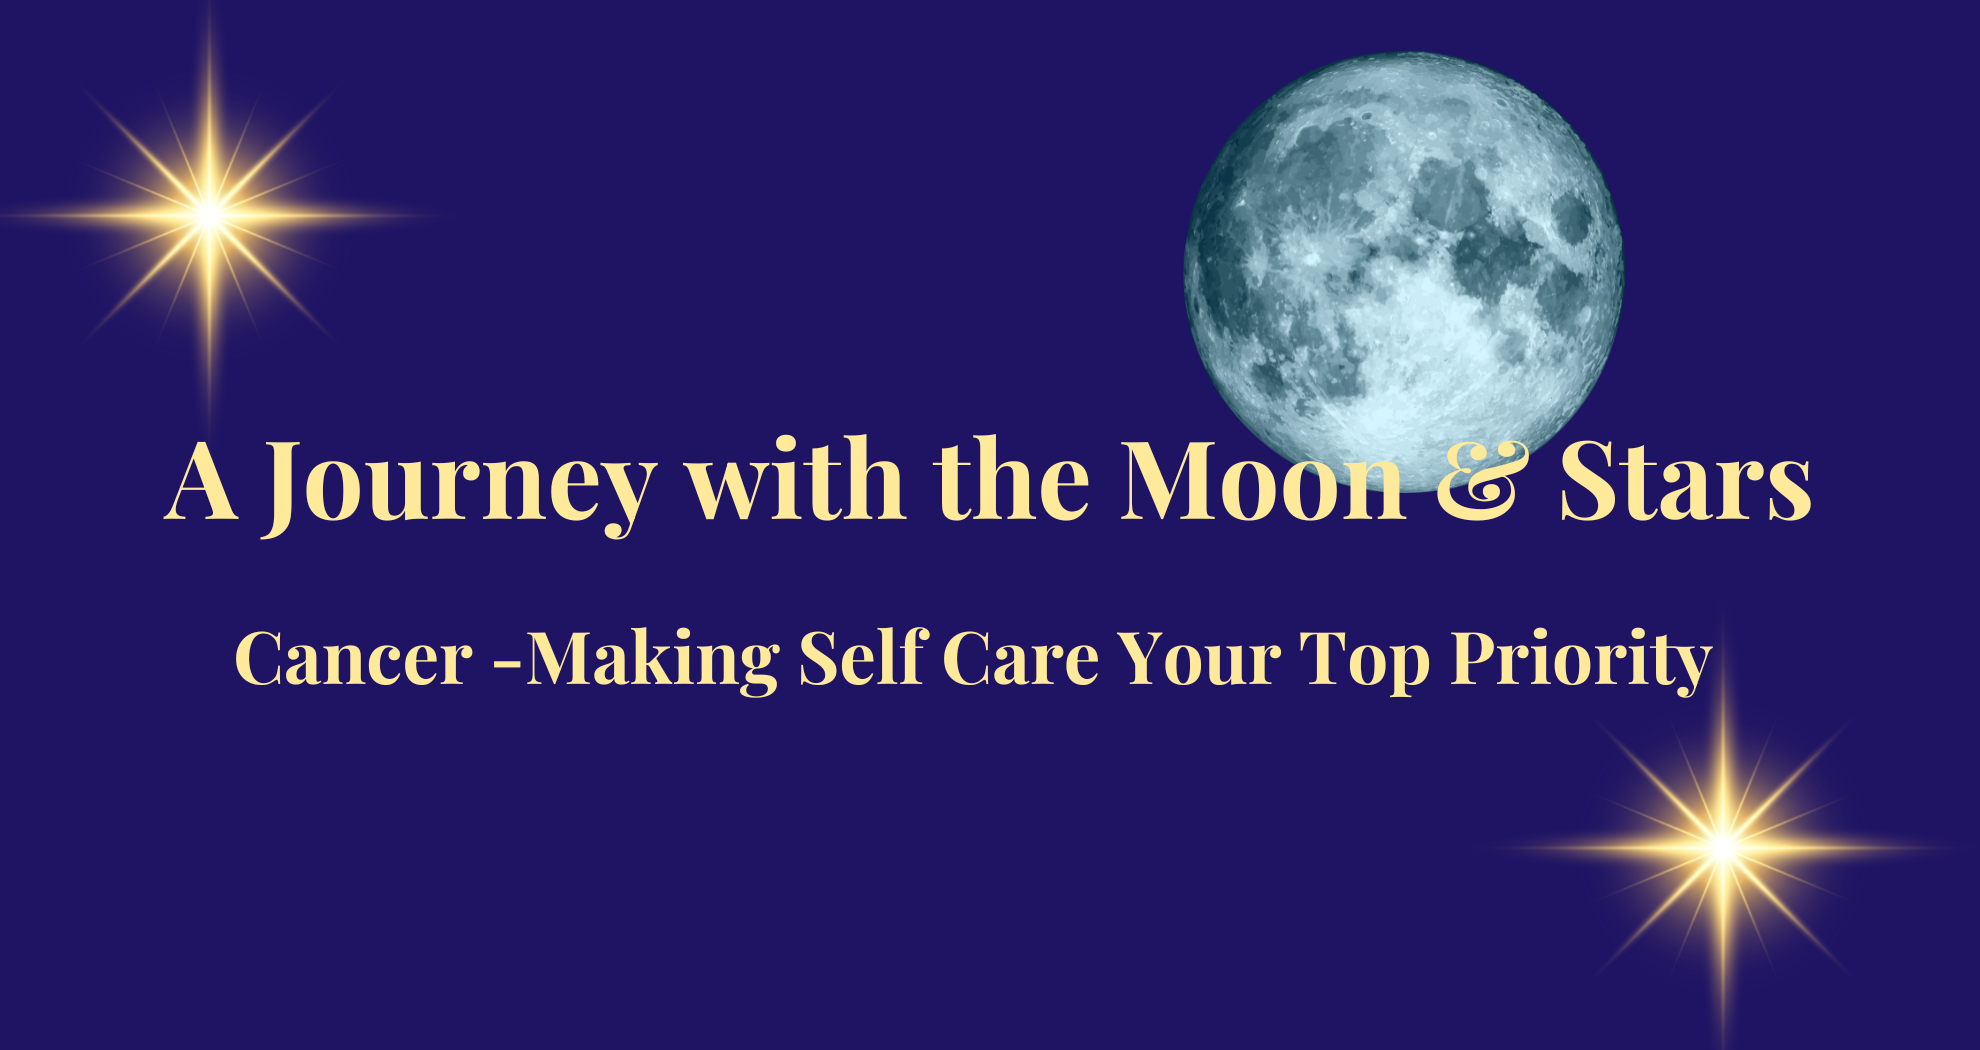 Cancer - Making Self Care Your Top Priority